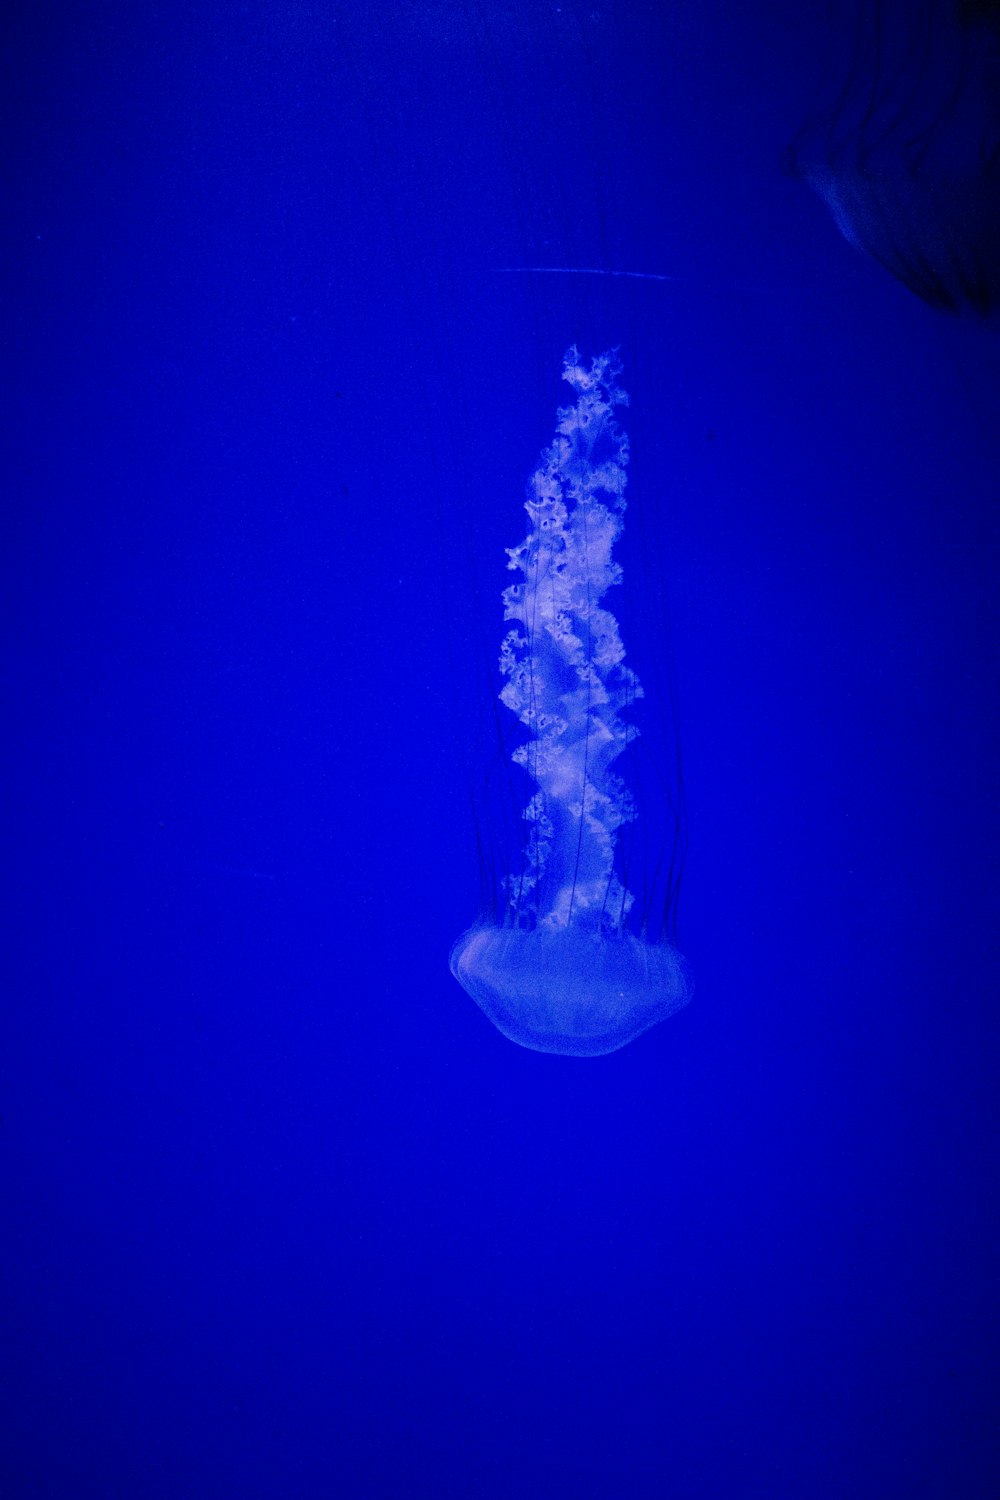 a jellyfish swimming in the deep blue water